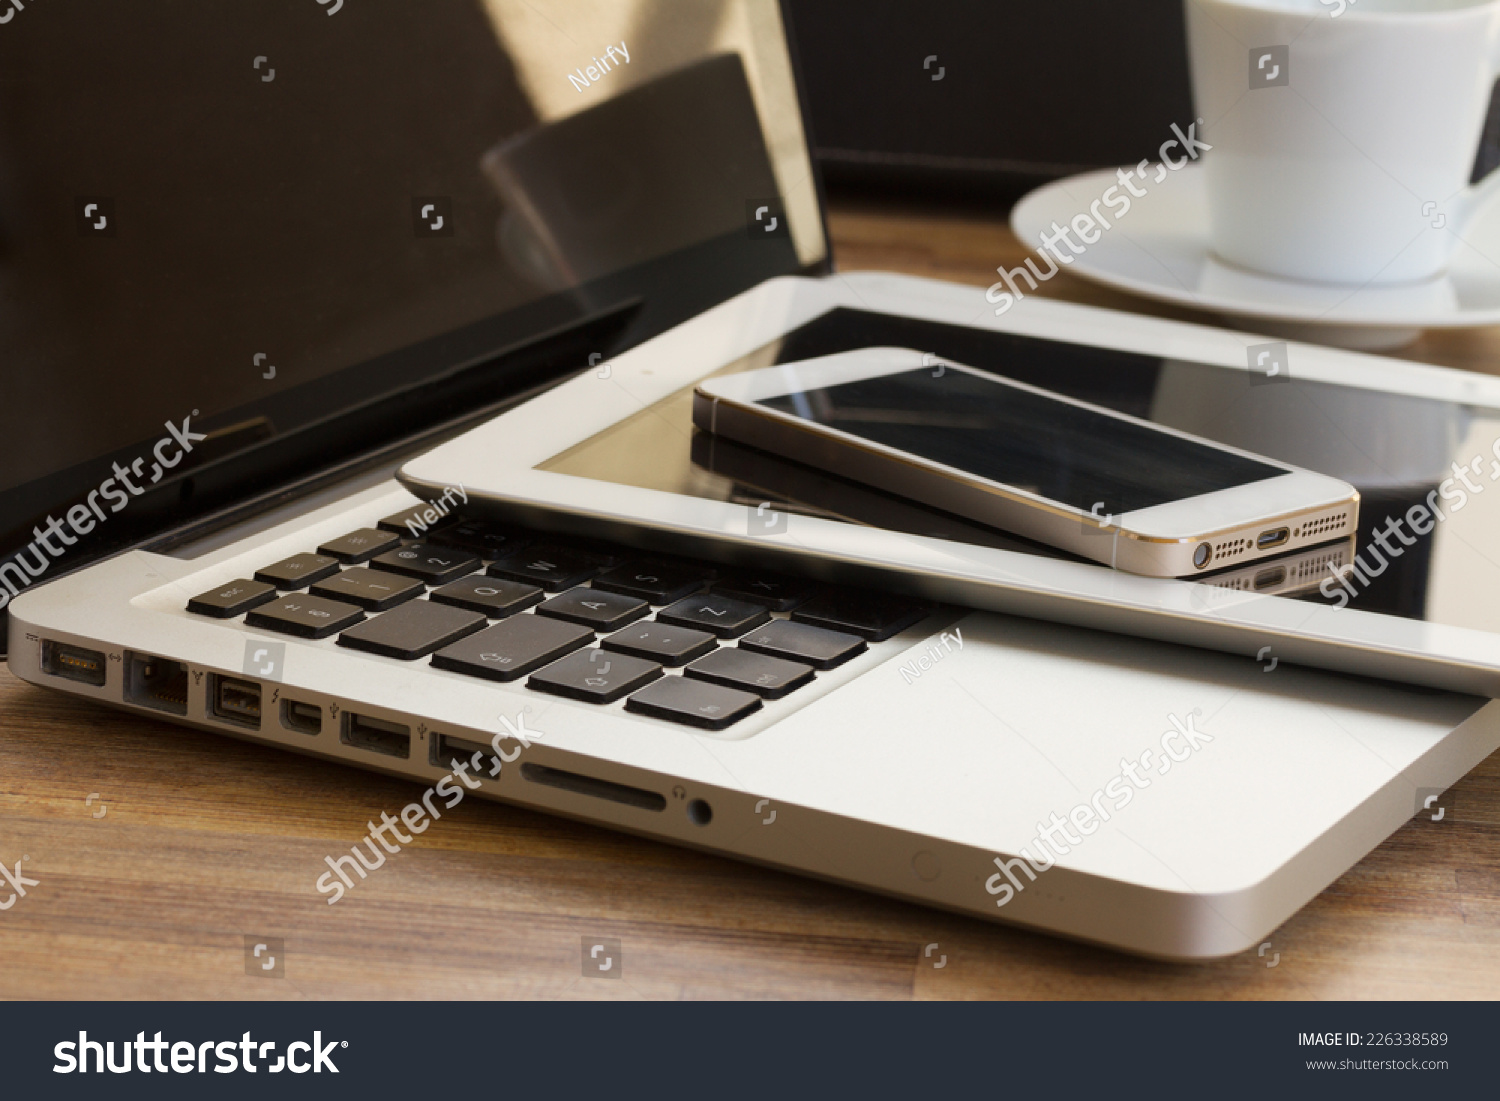 modern computer gadgets  - laptop, tablet and phone close up #226338589